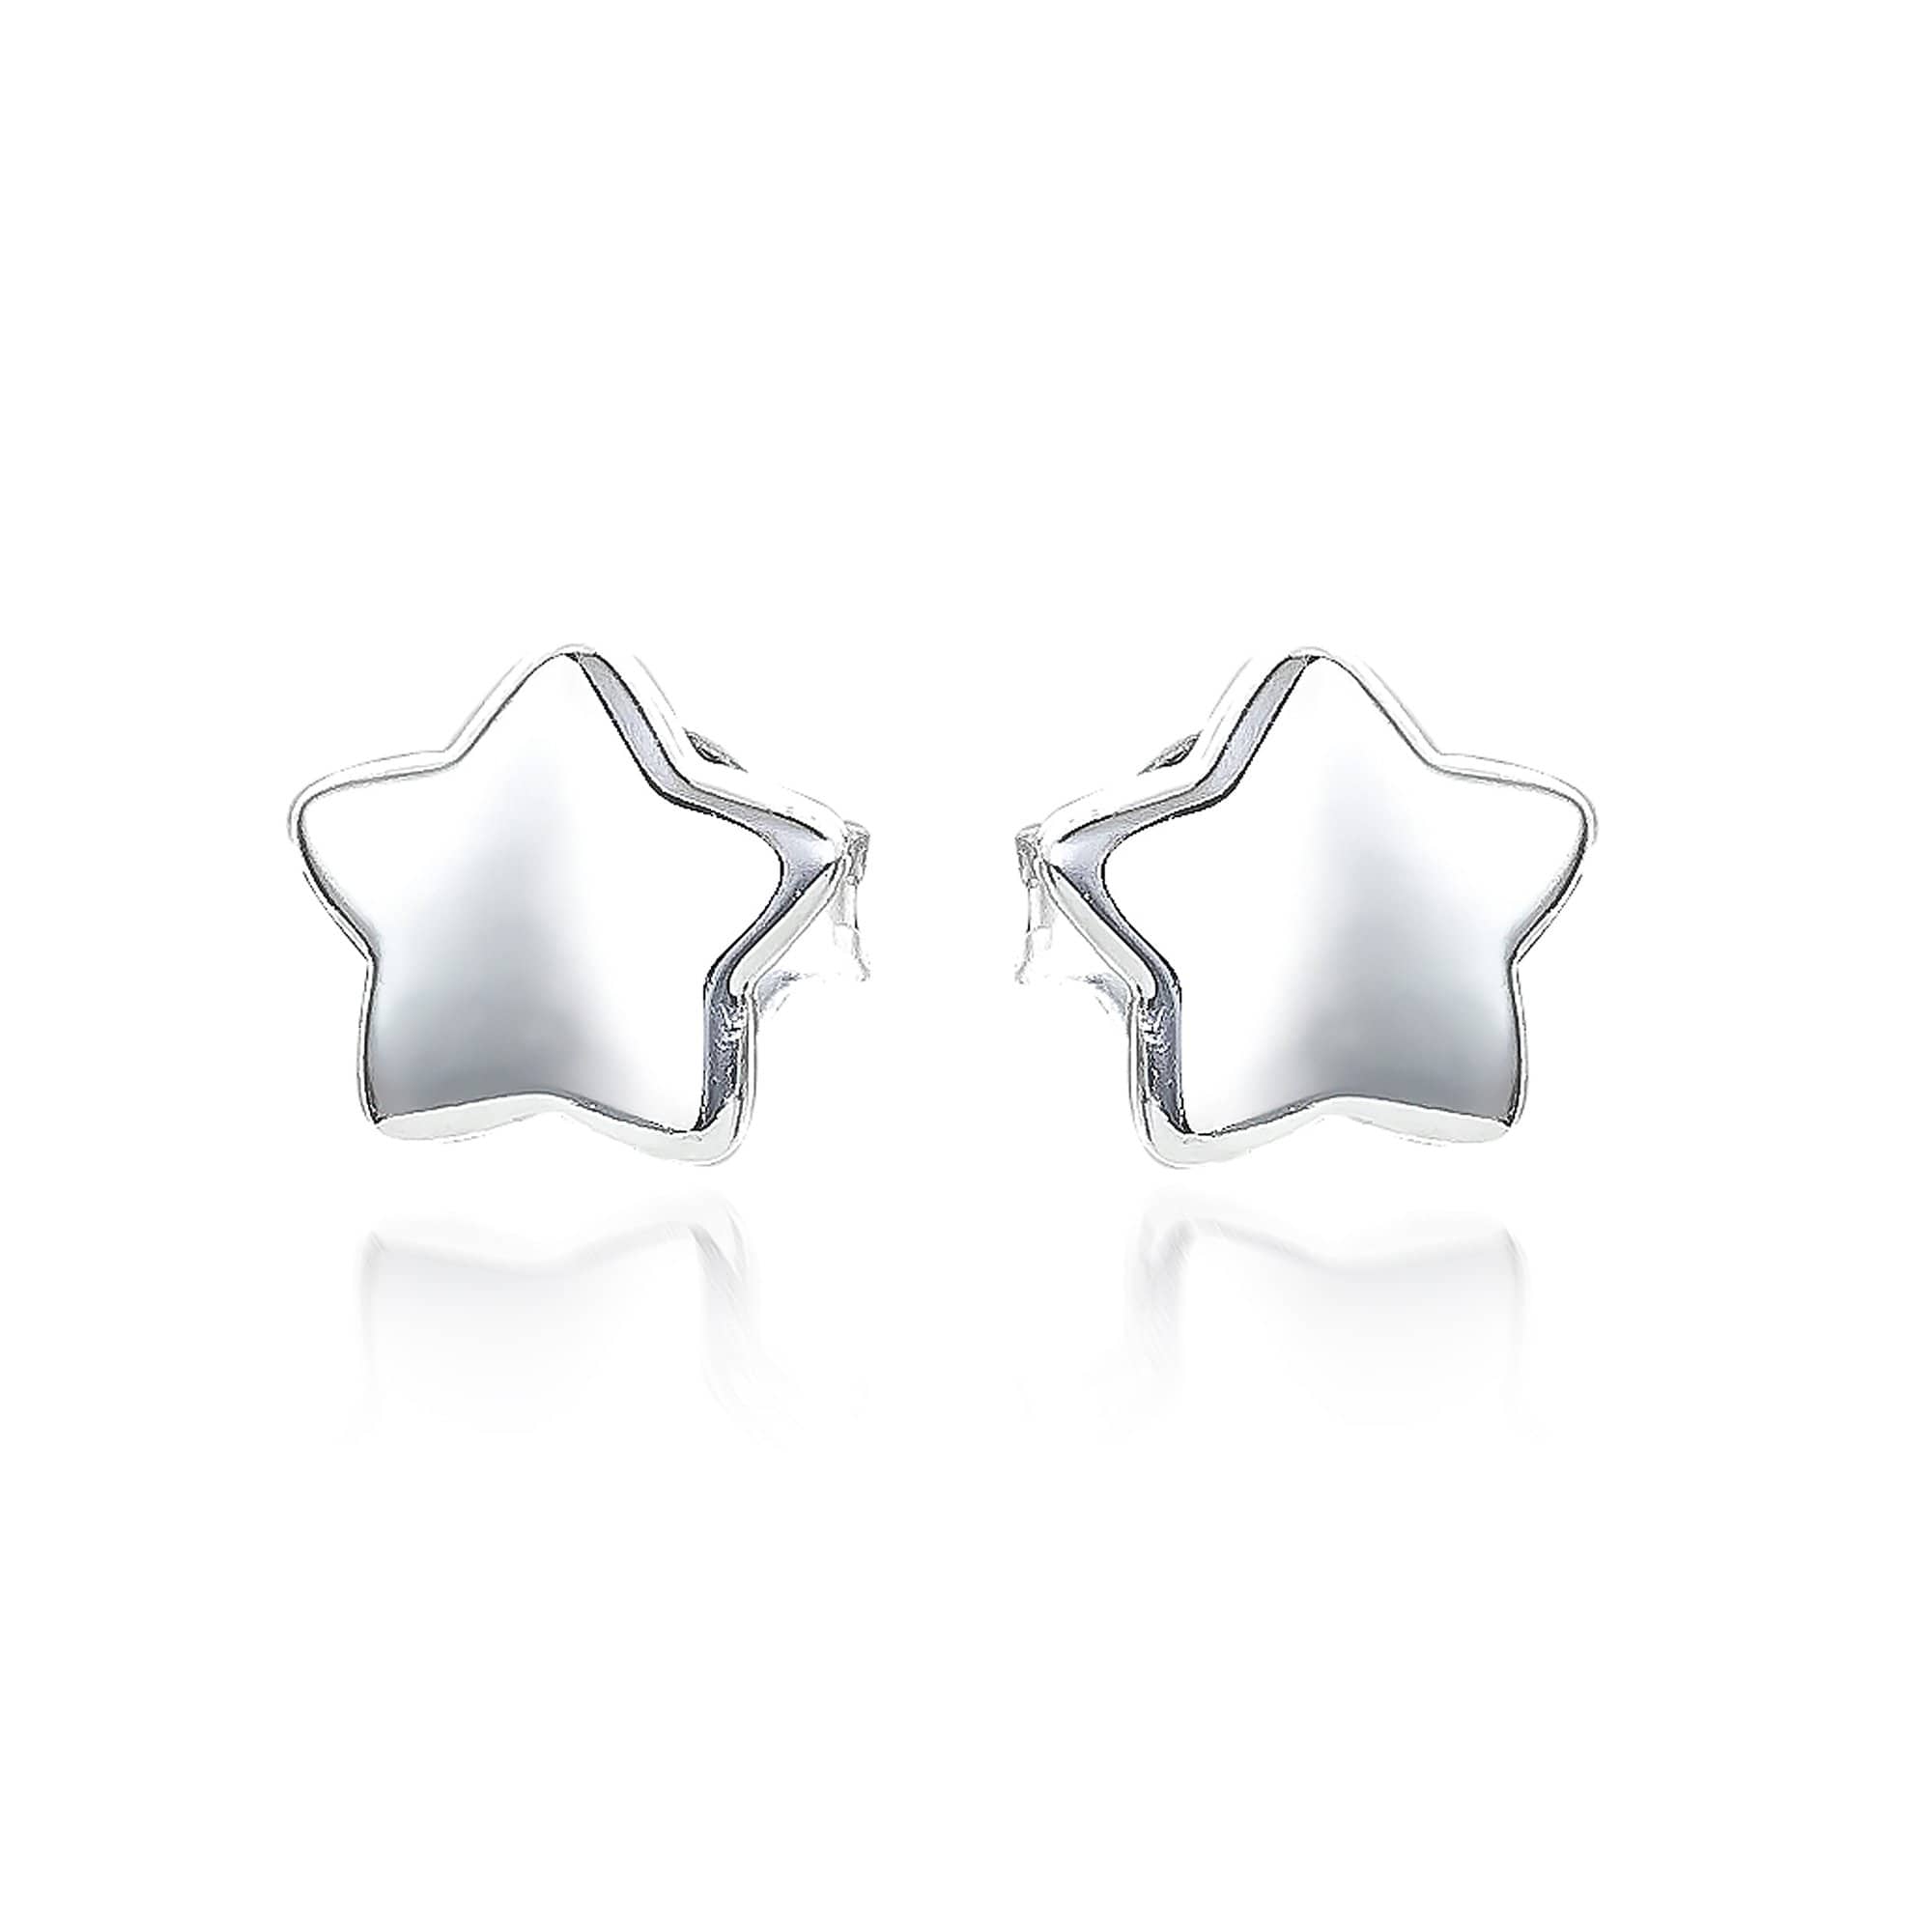 Lynora Jewellery Earring Sterling Silver Small Silver Star Stud Sterling Silver